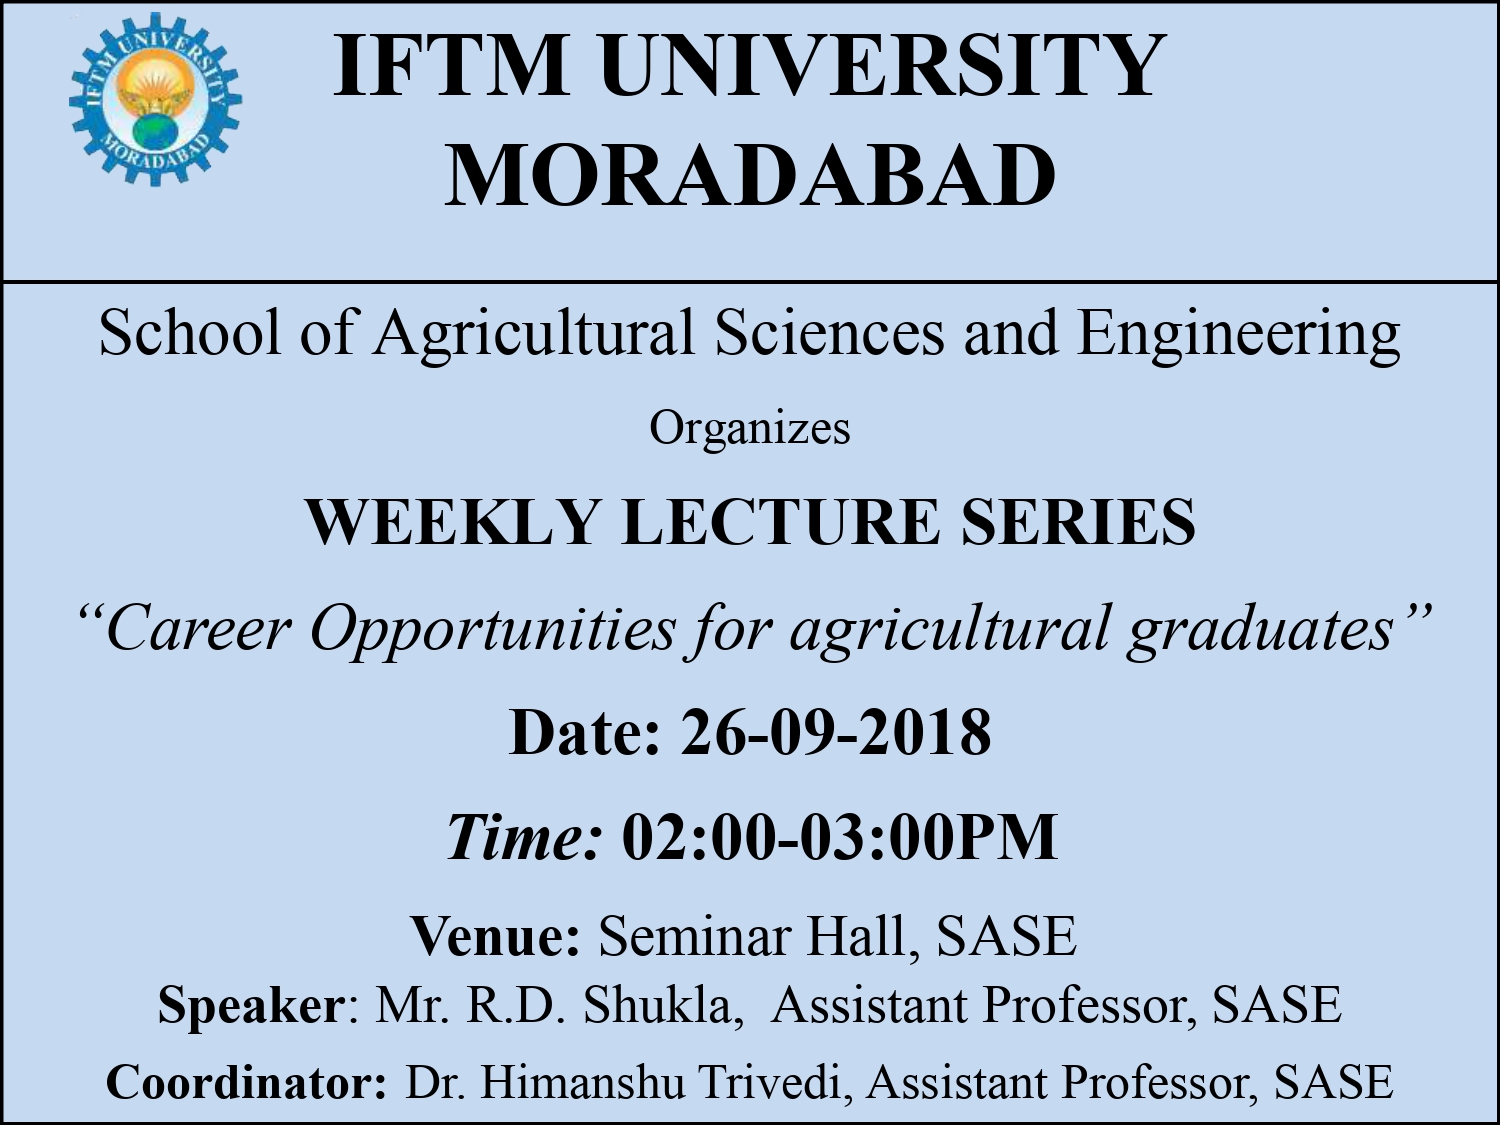 Weekly Lecture Series: “Career Opportunities for agricultural graduates”